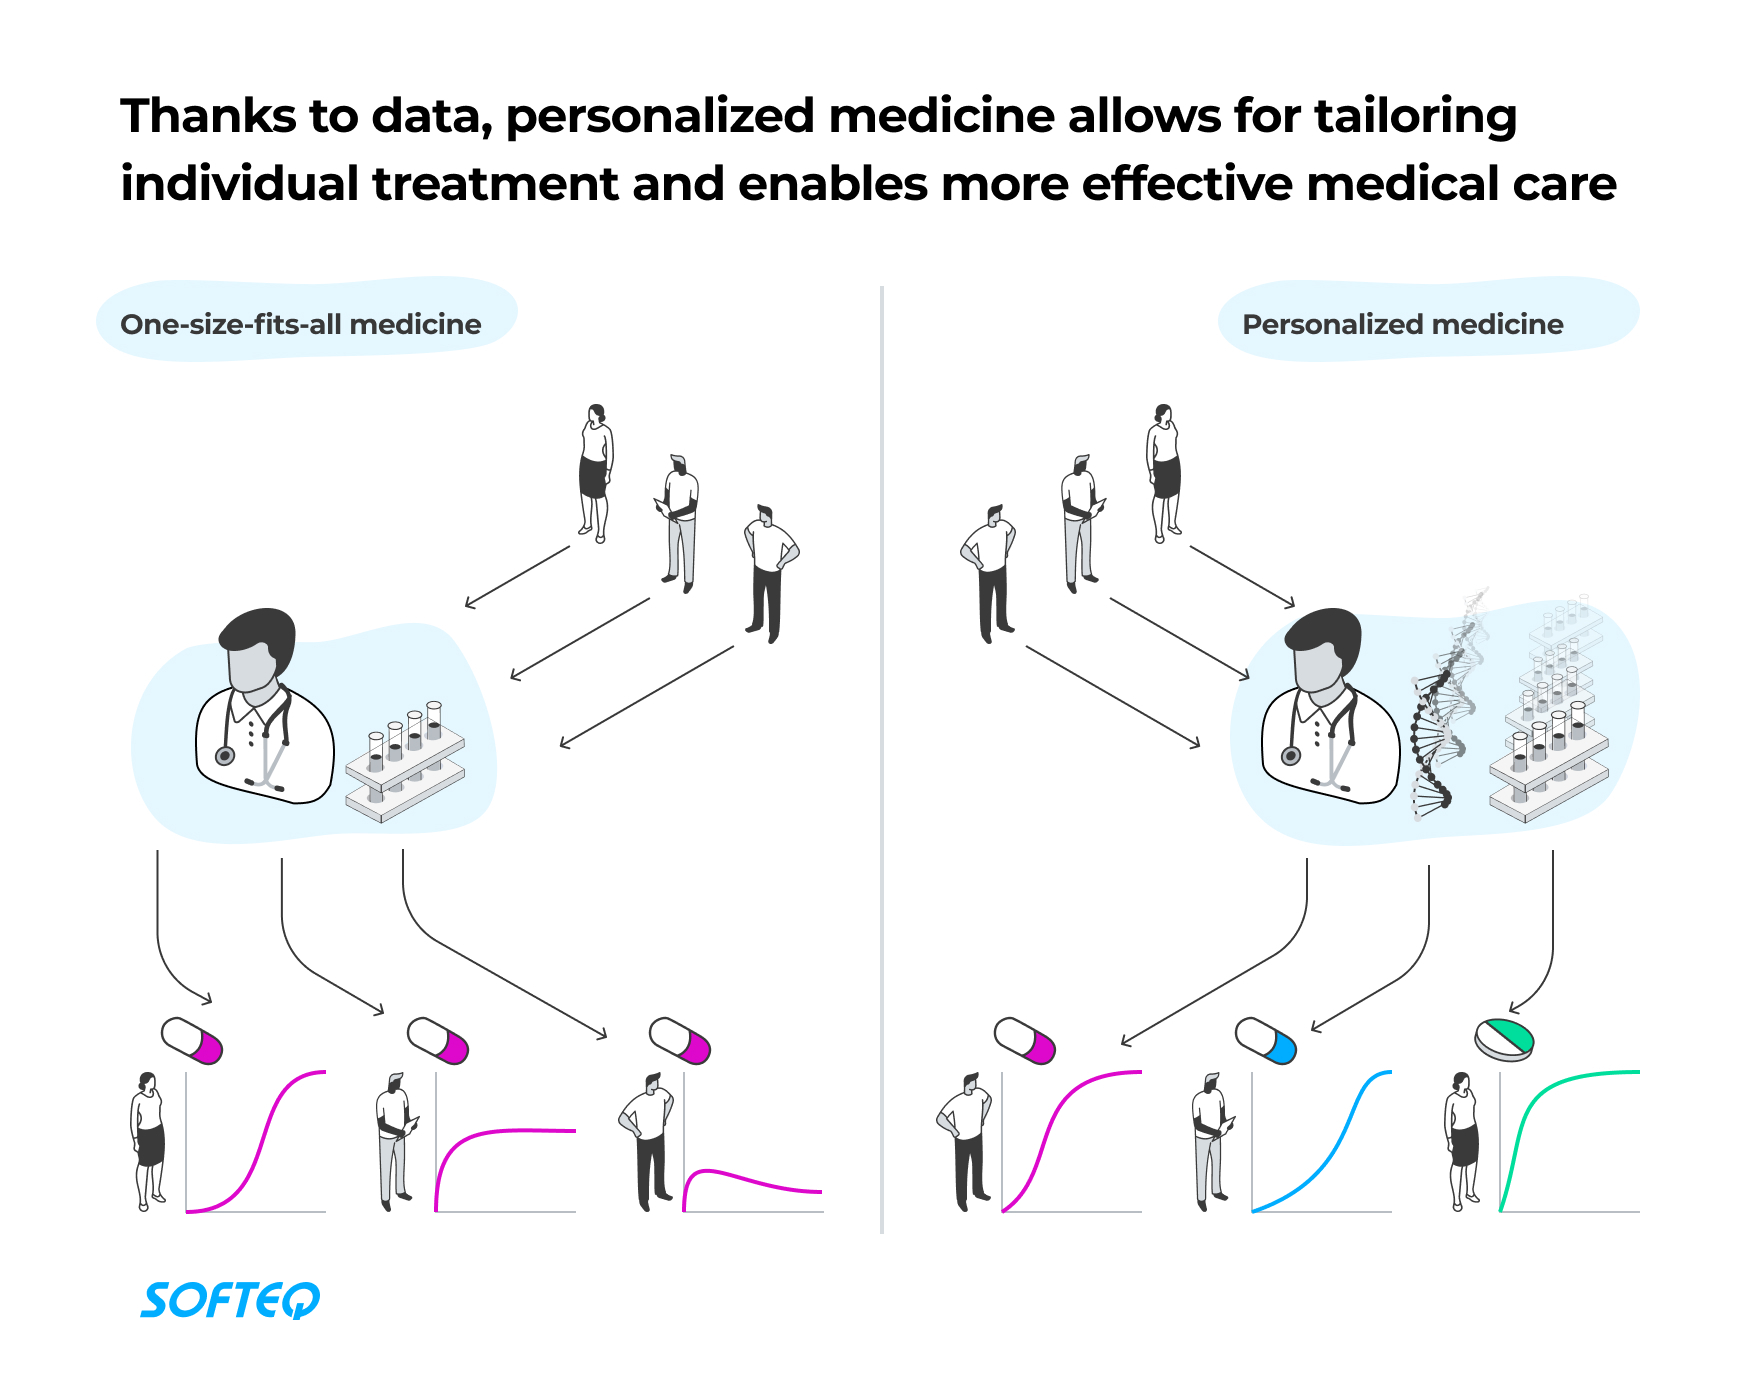 Using Big Data and AI in Personalized Medicine